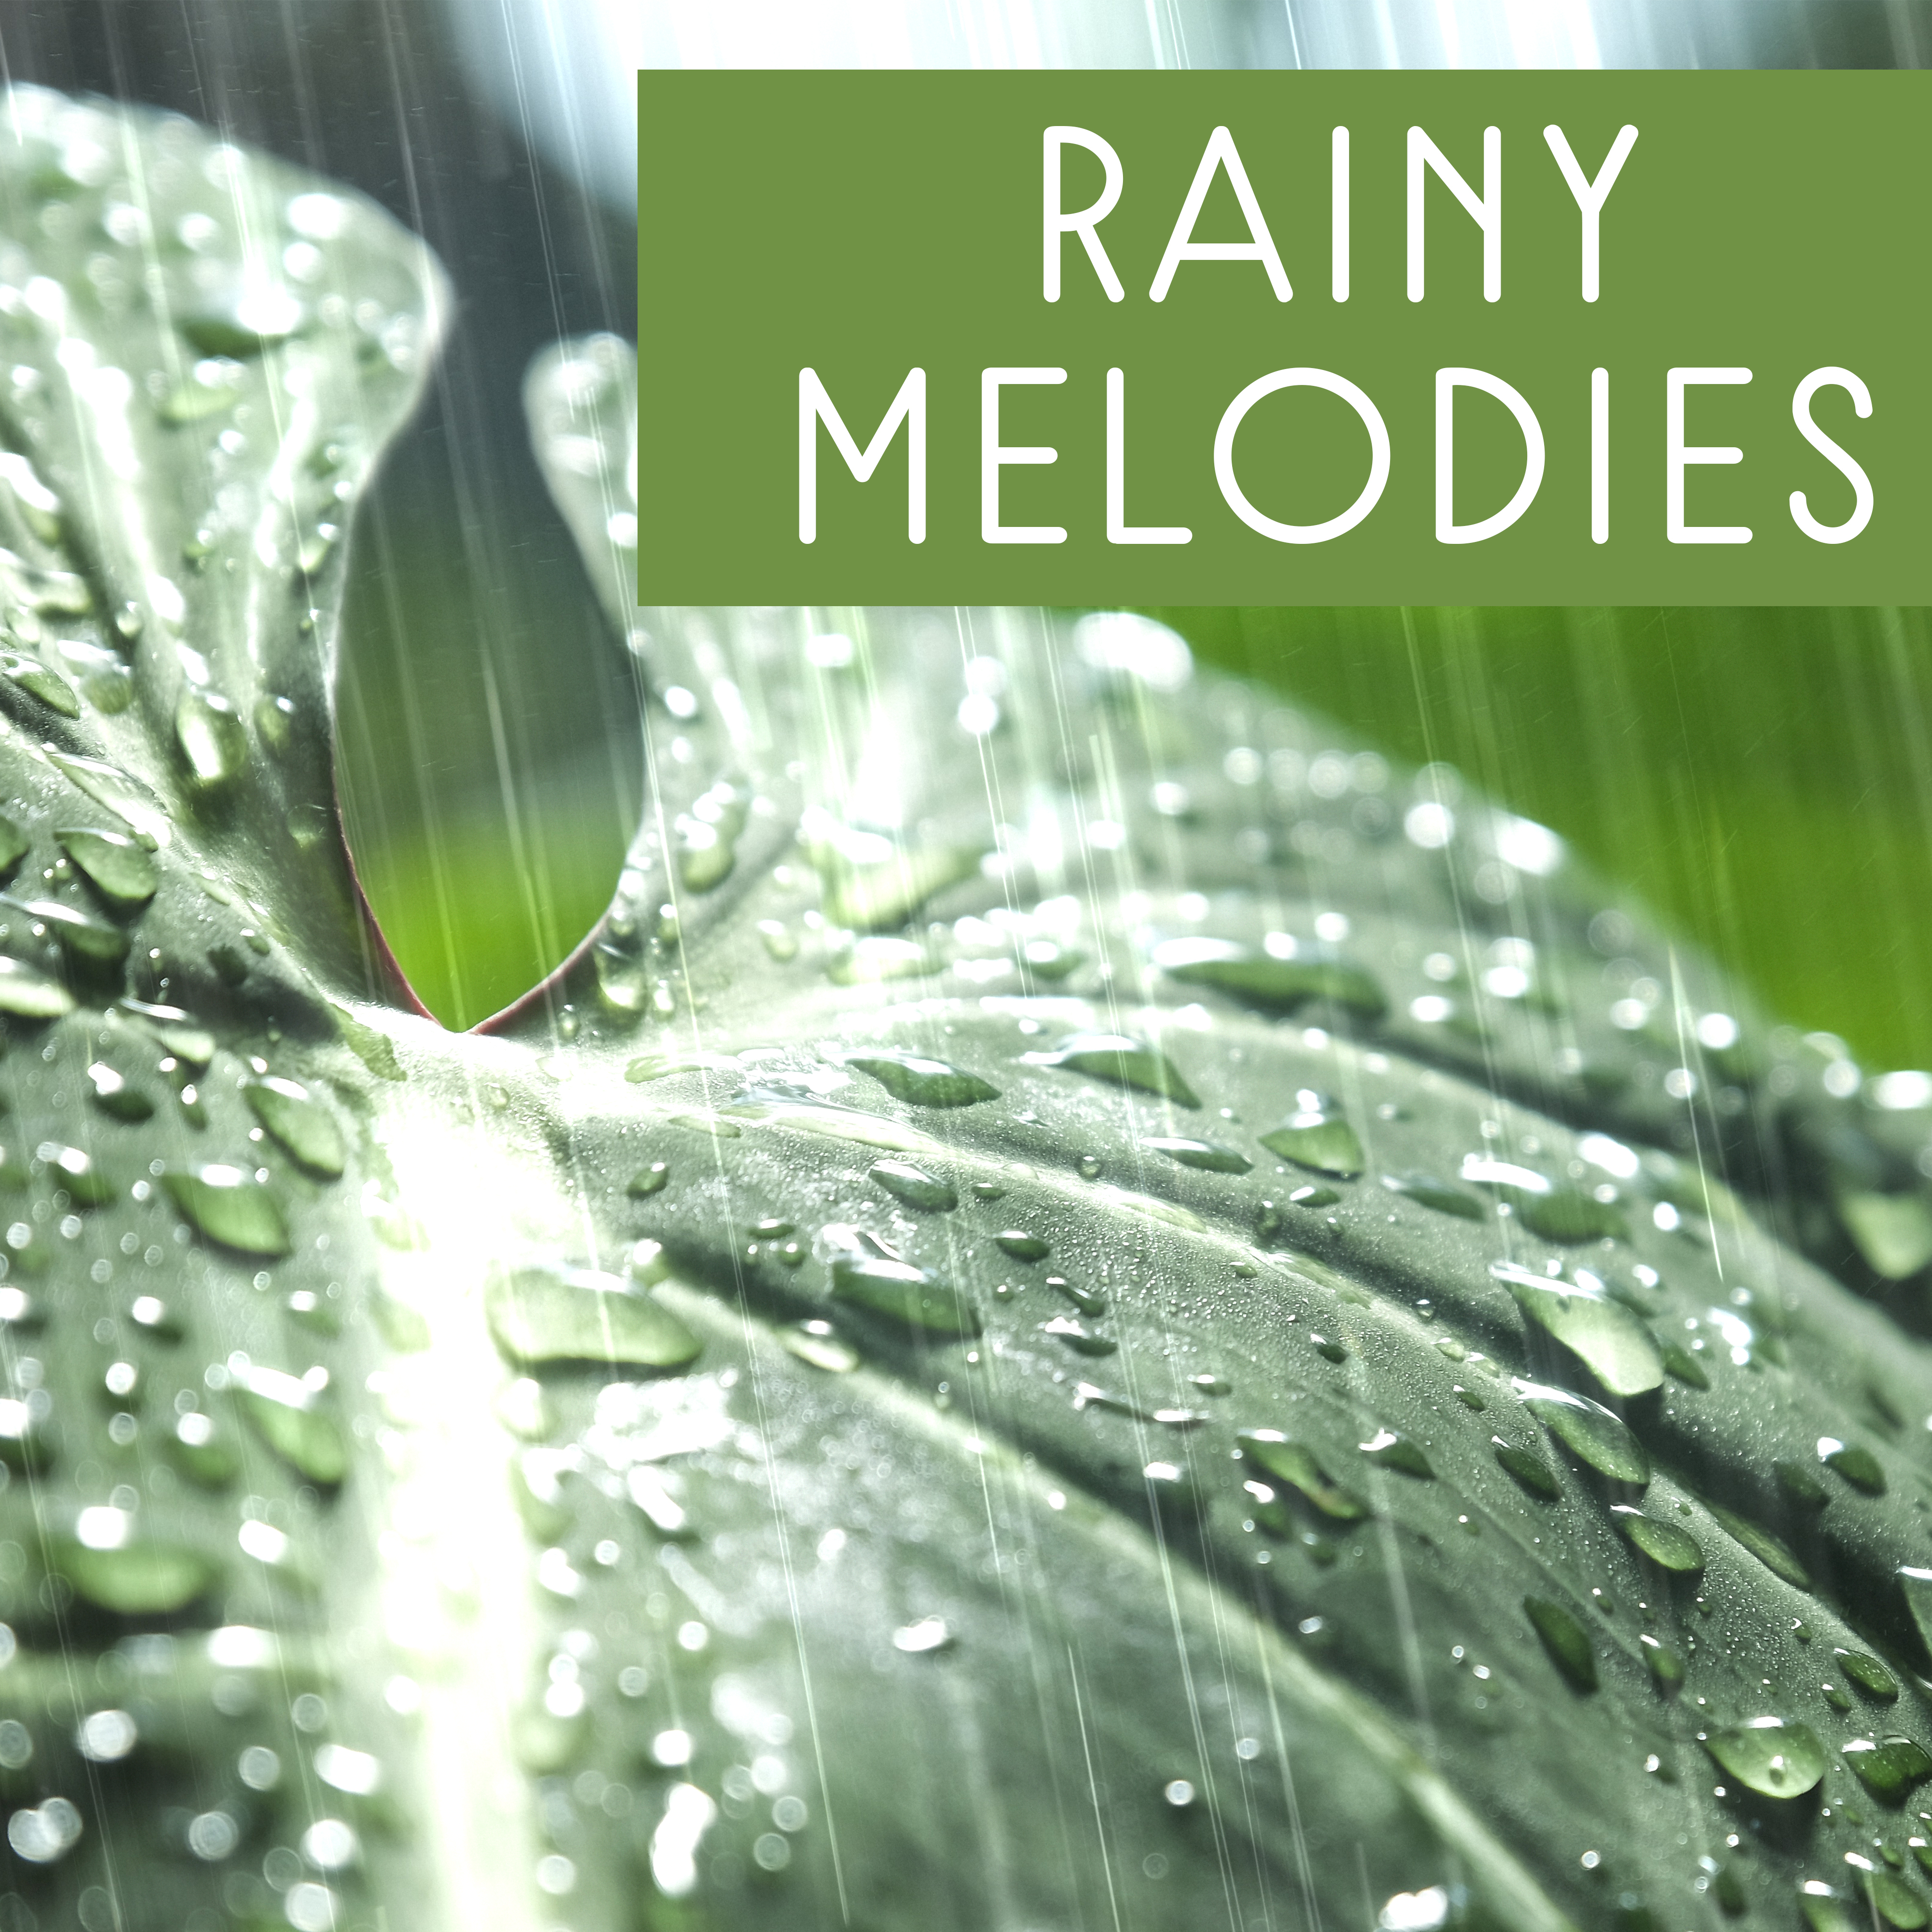 Rainy Melodies – Sounds of Nature, Rainy Songs, Good Mood, New Age, Relaxing Music